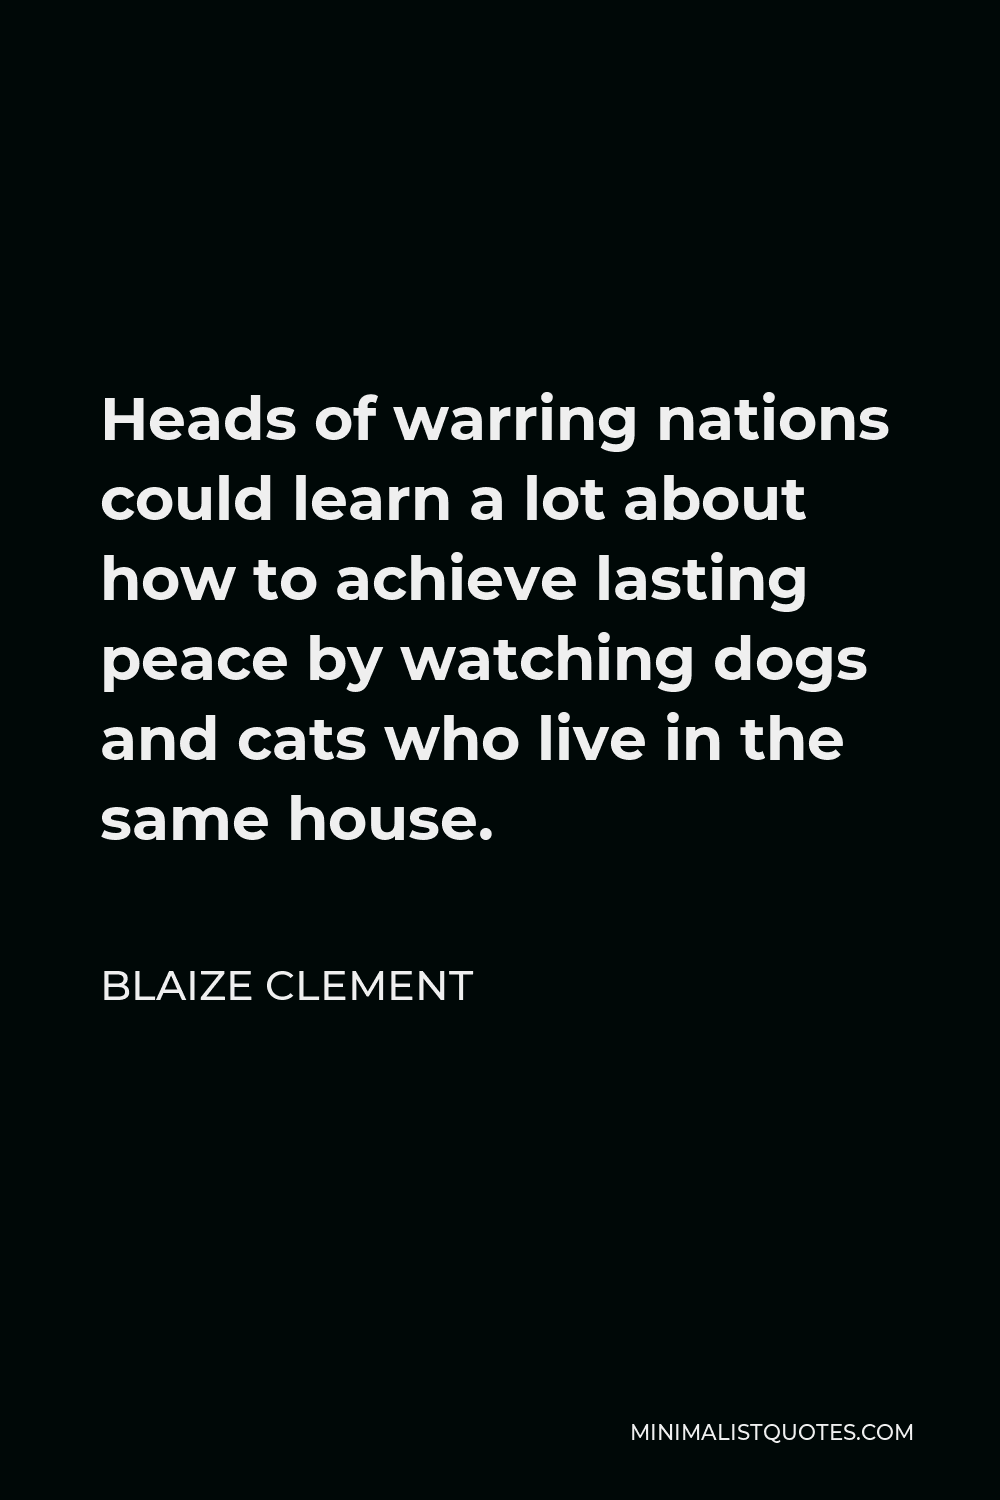 Blaize Clement Quote - Heads of warring nations could learn a lot about how to achieve lasting peace by watching dogs and cats who live in the same house.